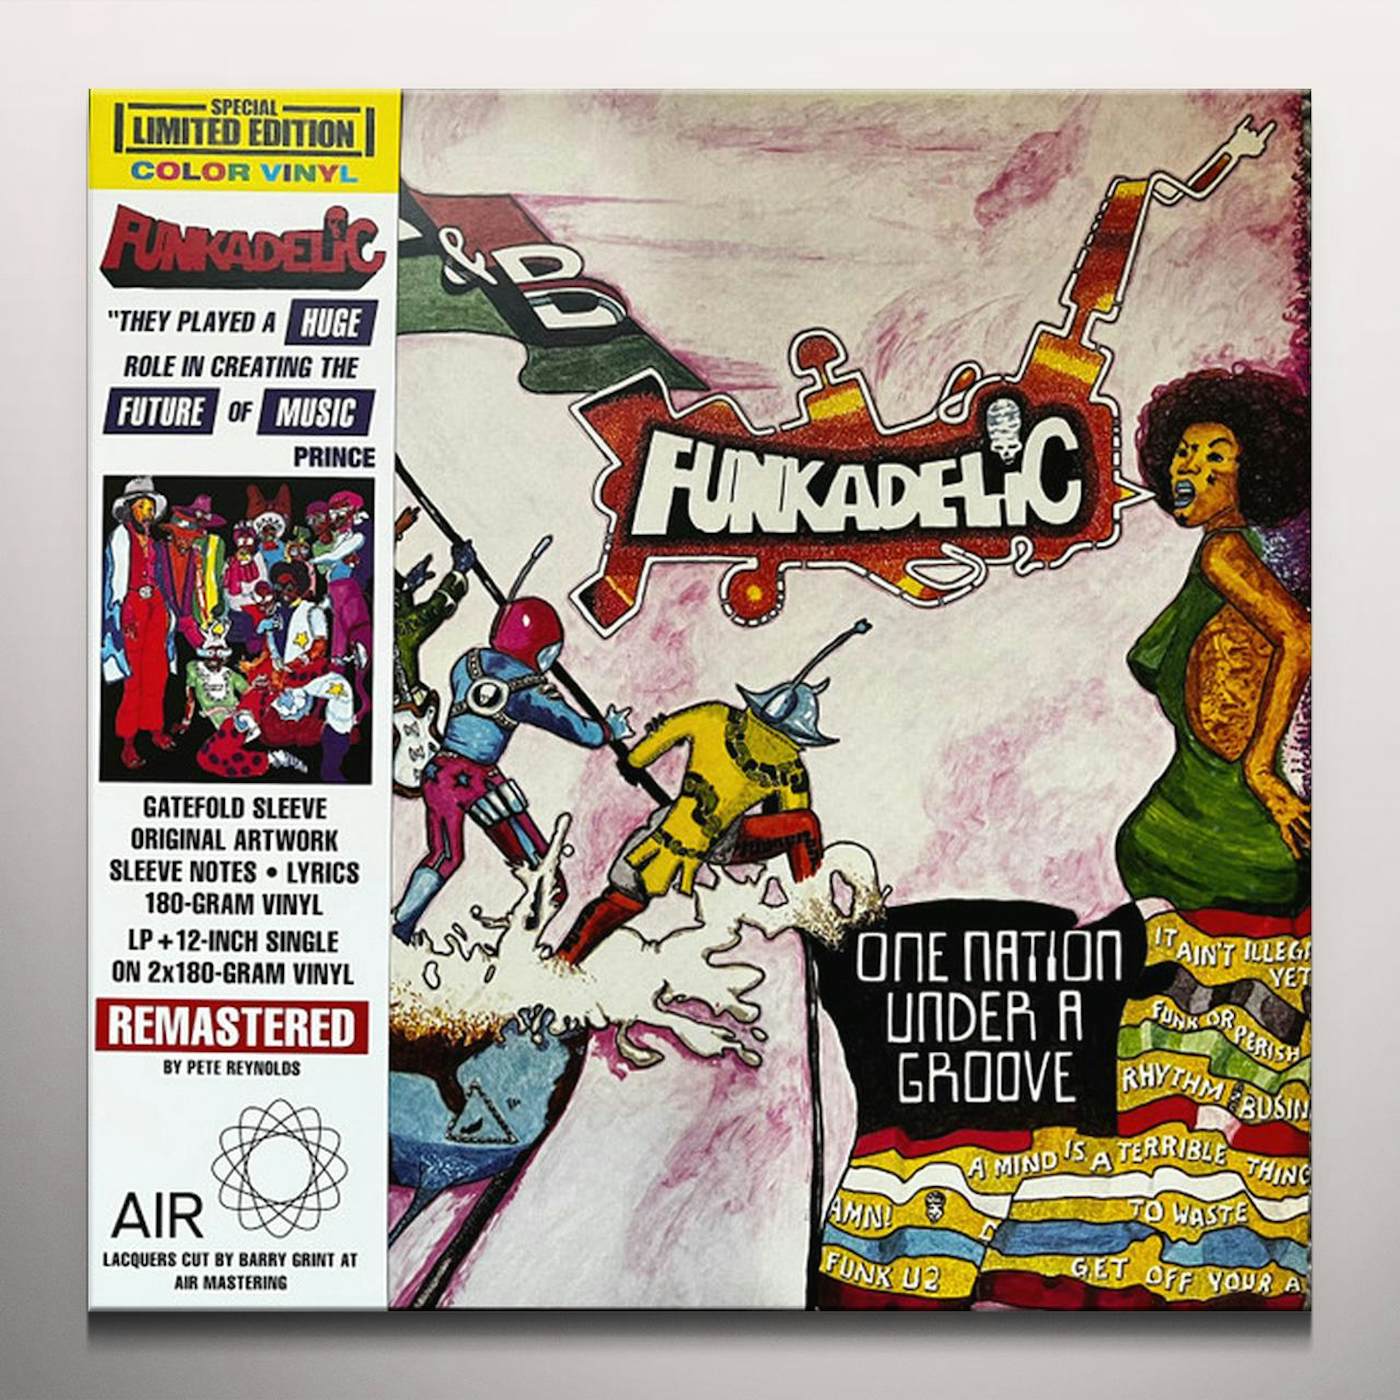 Funkadelic ONE NATION UNDER A GROOVE Vinyl Record